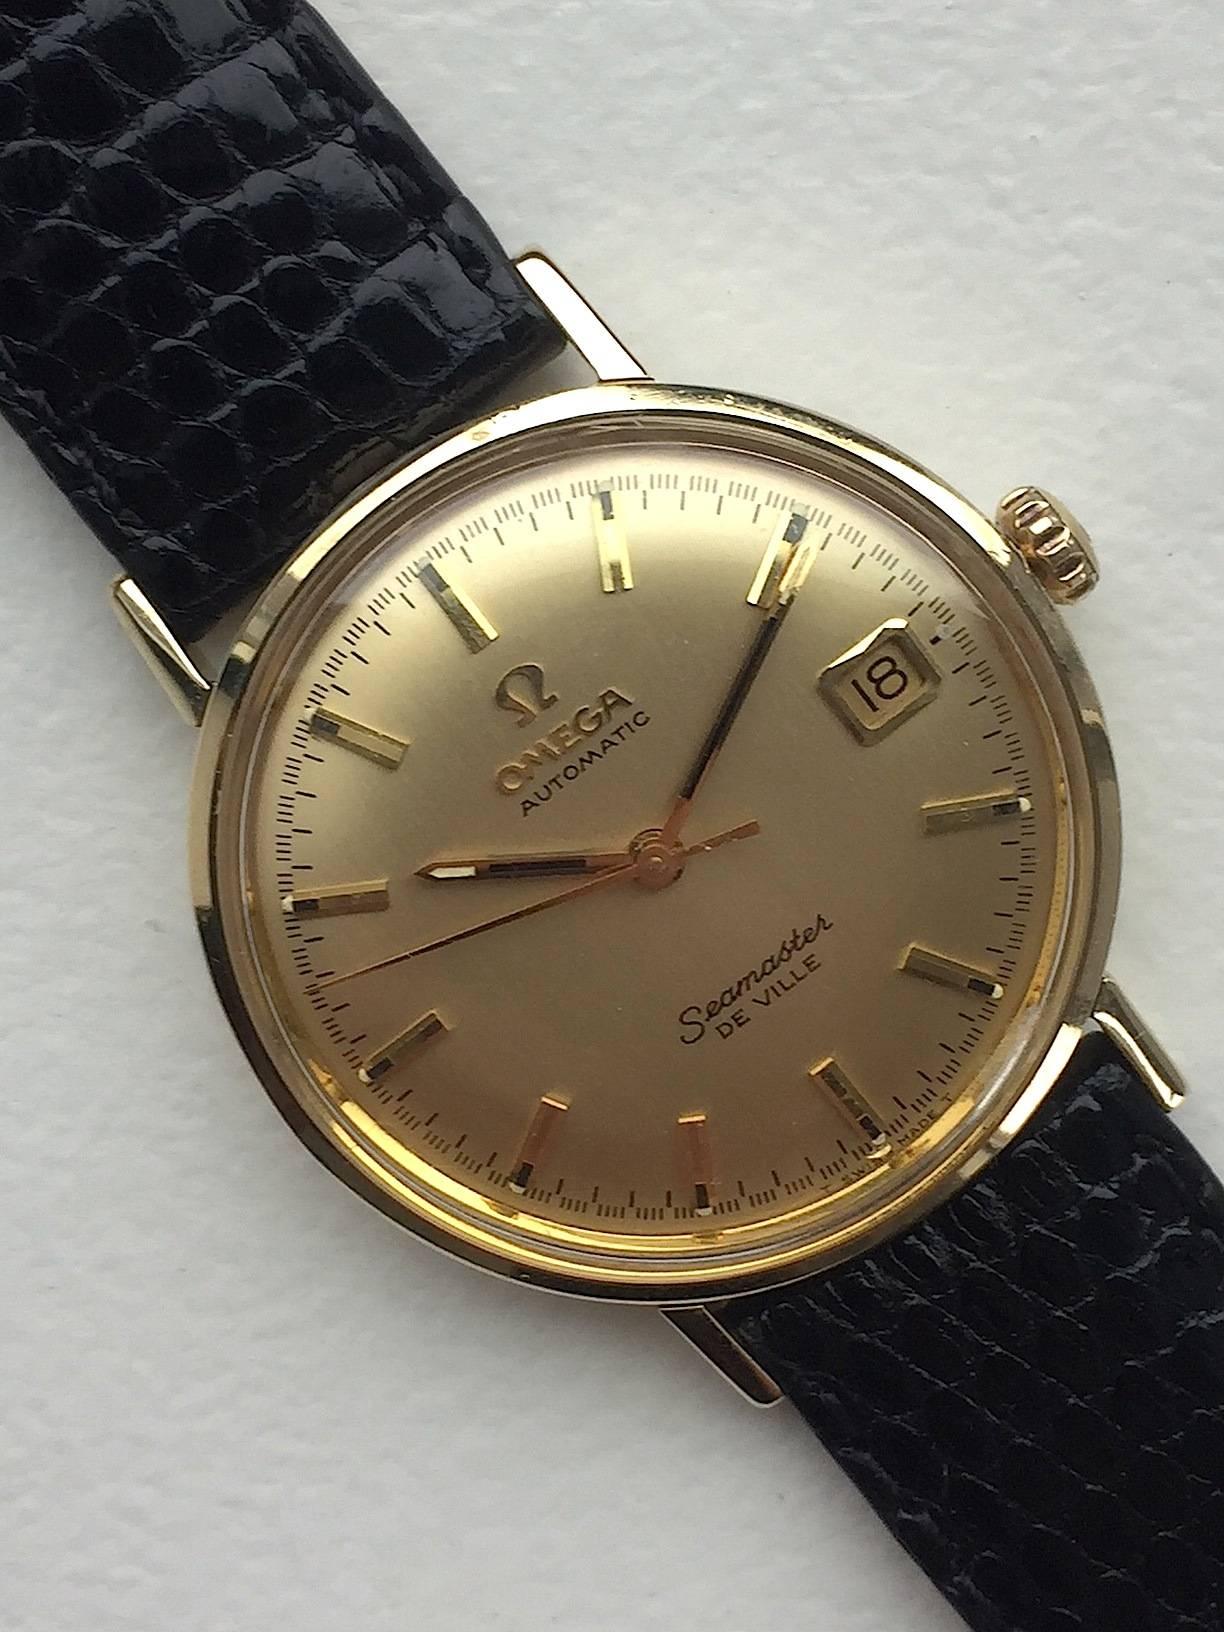 14K Yellow Gold Omega Seamaster Deville Automatic Watch 1970's
Champagne Colored Dial with Applied Hour Markers and Date at Three O'Clock
Yellow Gold Smooth Bezel
14K Yellow Gold Case
34mm in size 
Features Omega Automatic Movement with Date